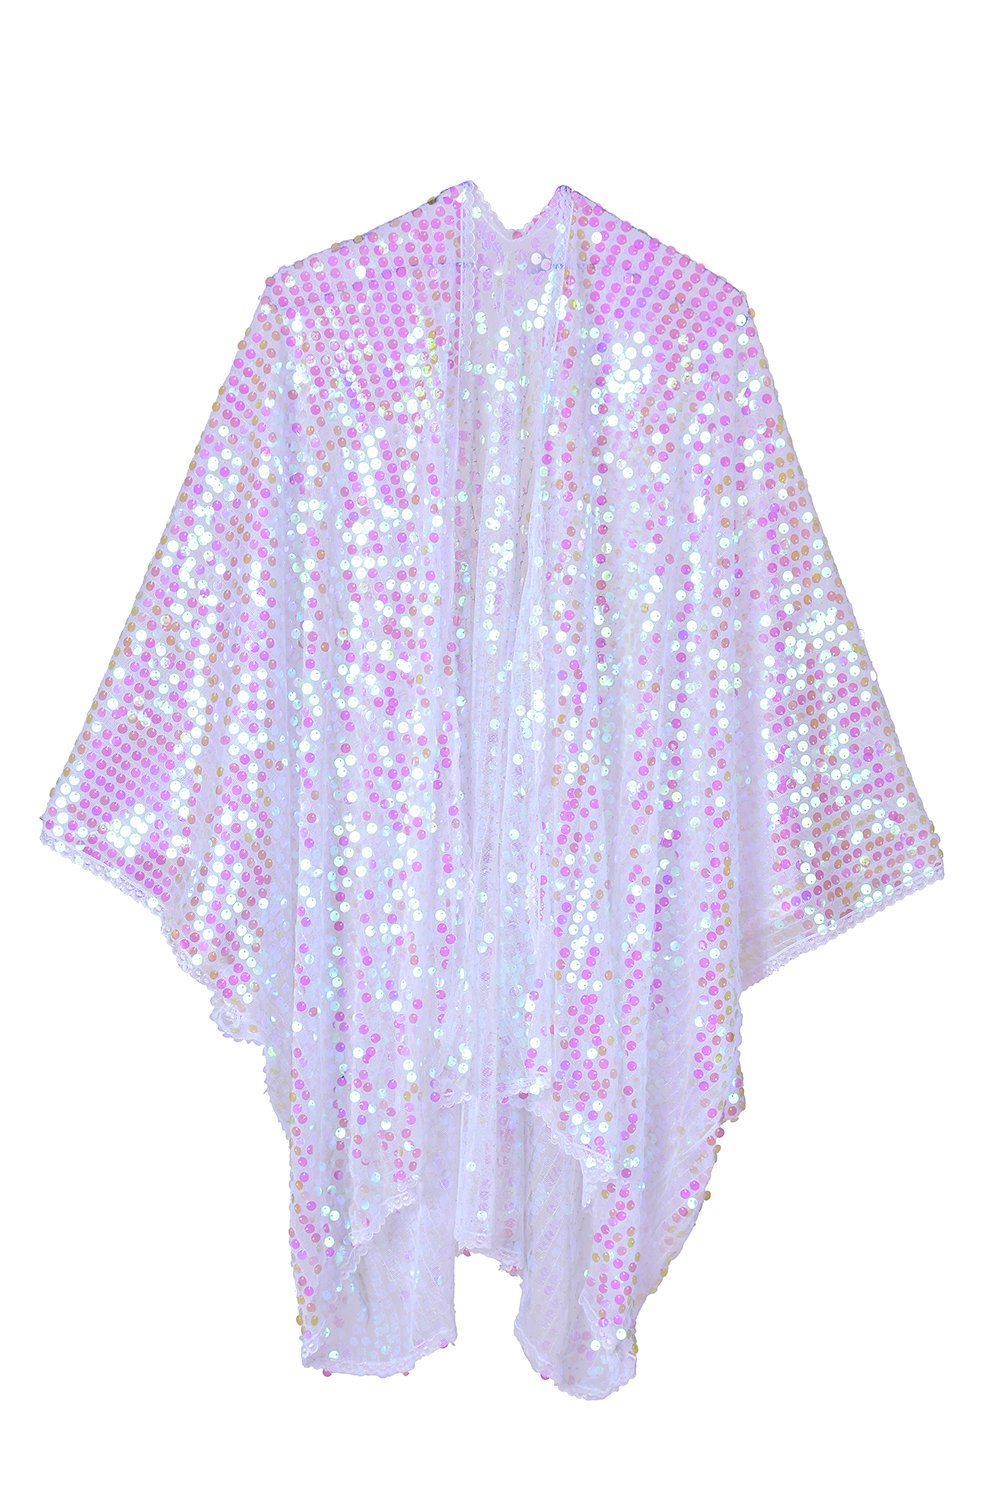 FULL OUTFIT - Disco Iridescent Babe